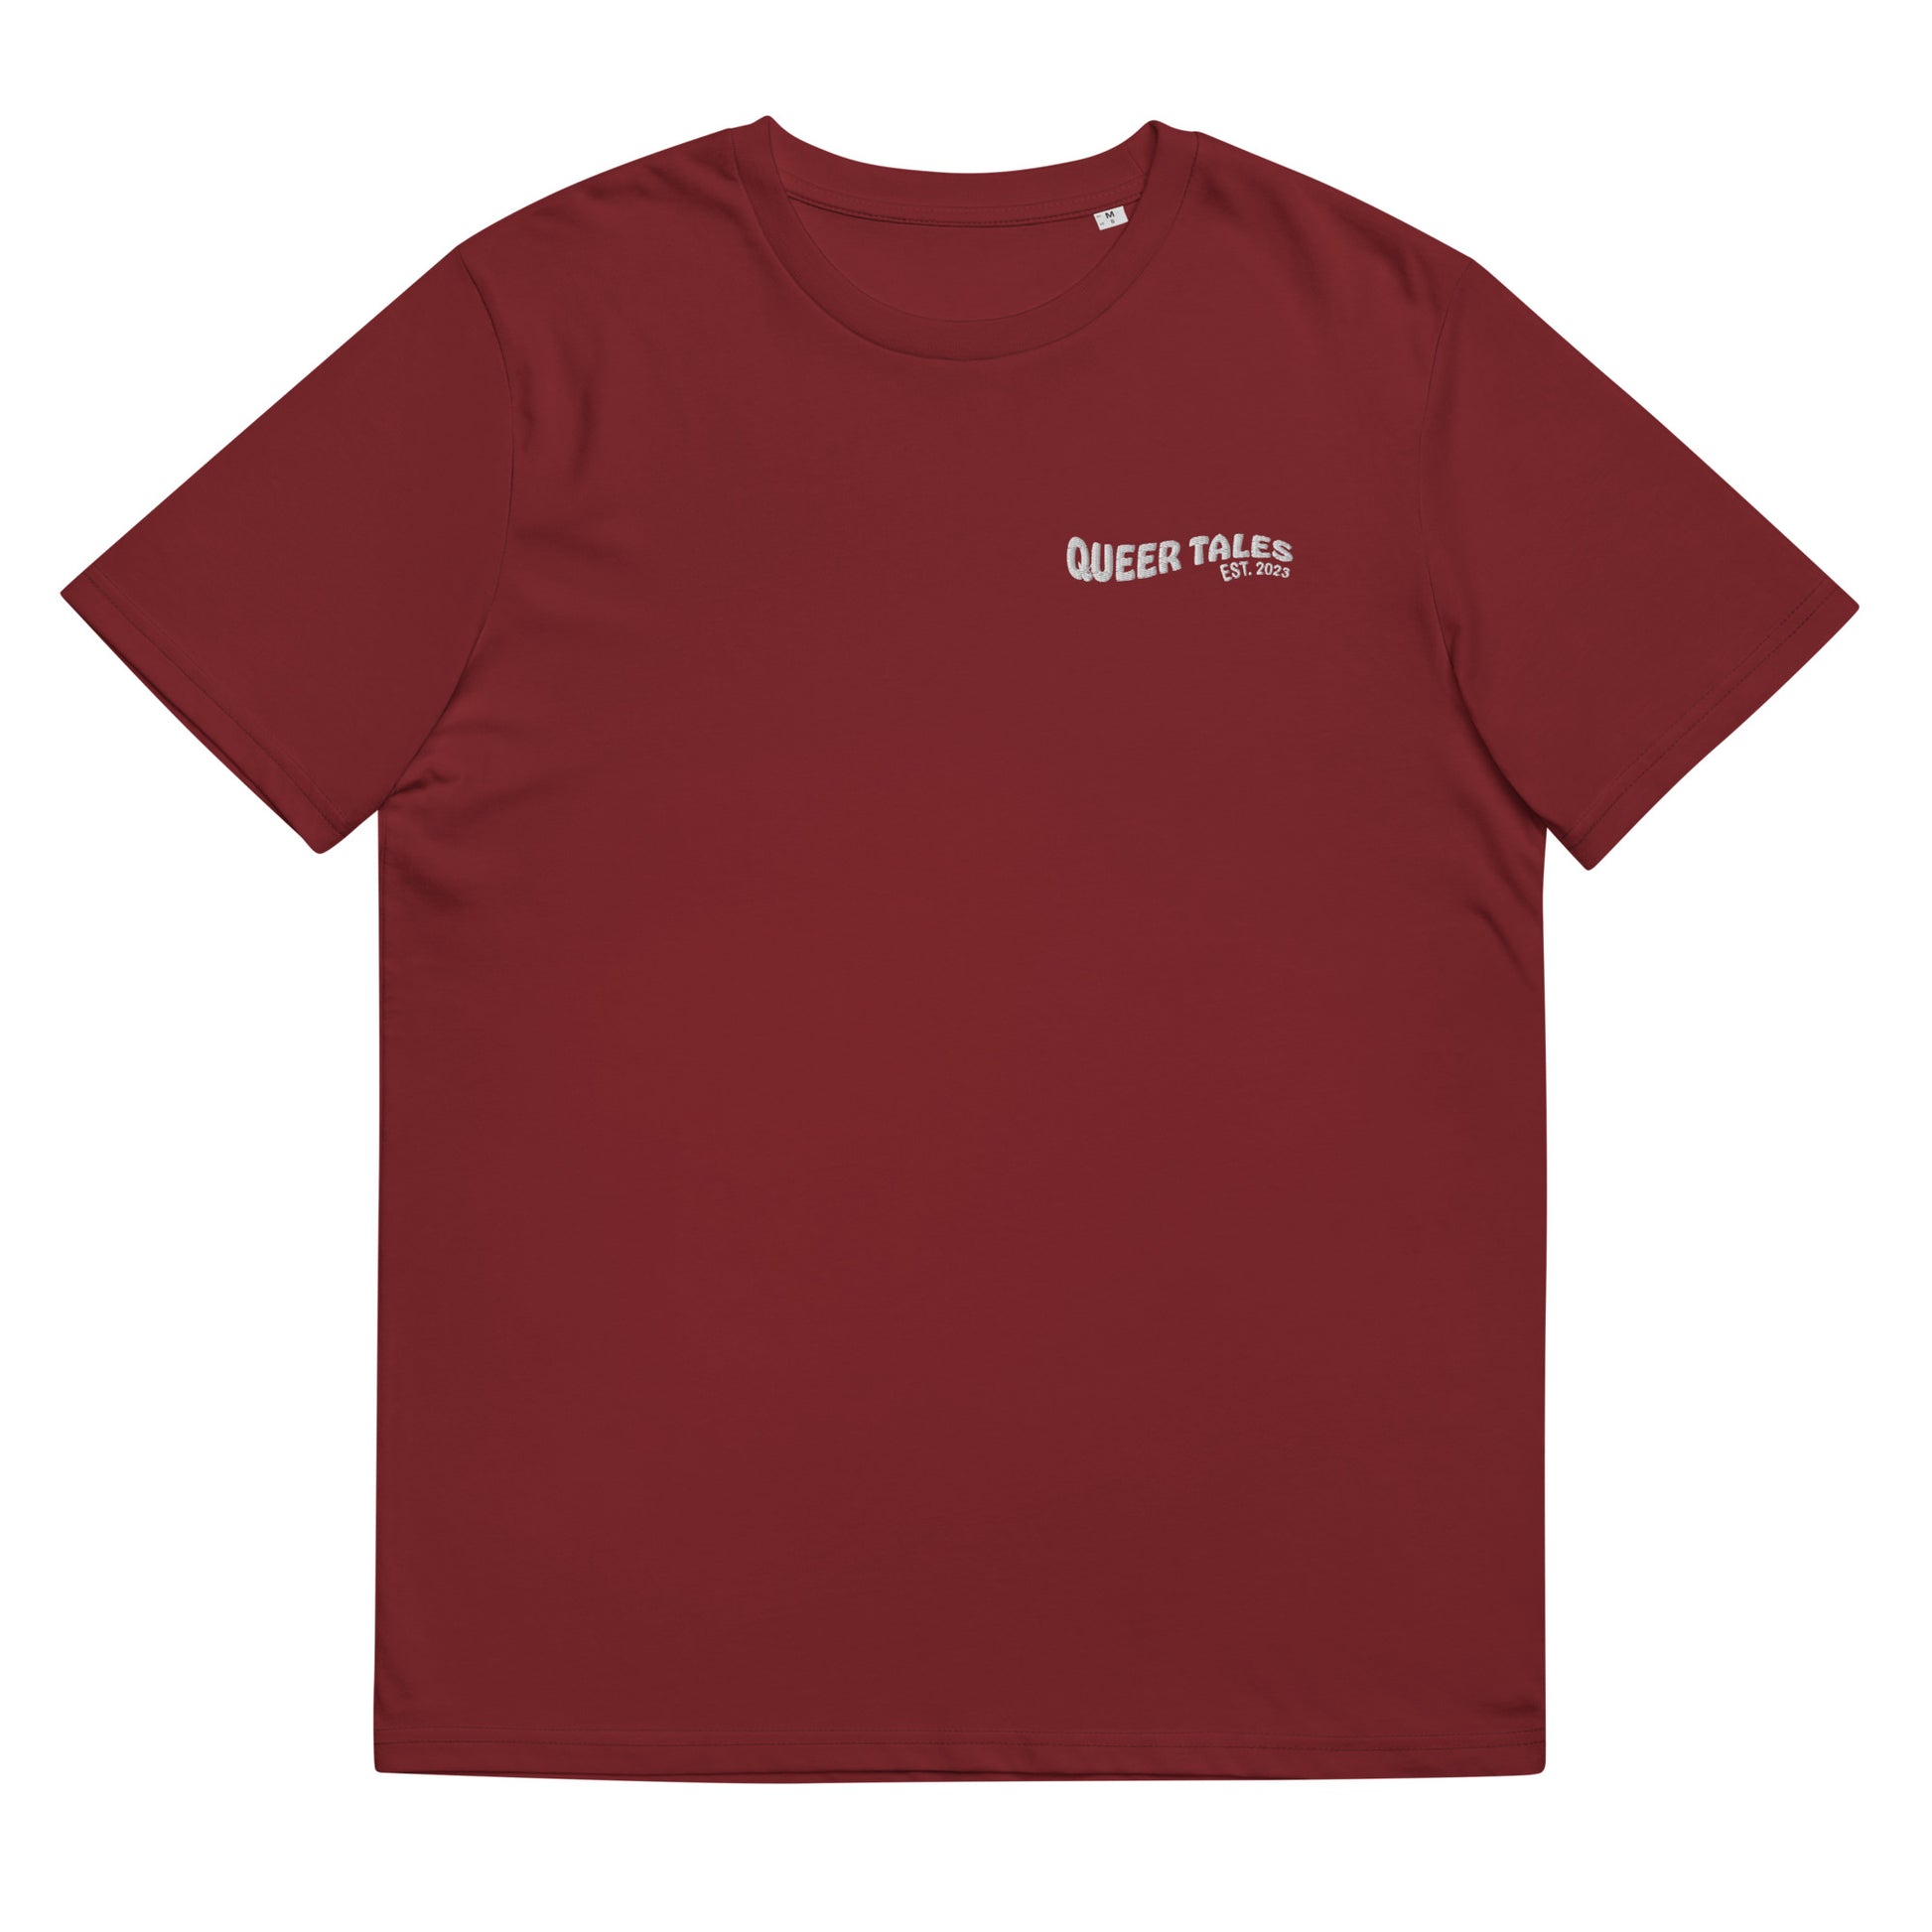 Fitted burgundy red organic cotton t-shirt with embroidered queer tales on the left chest. Available in sizes S to 2XL.